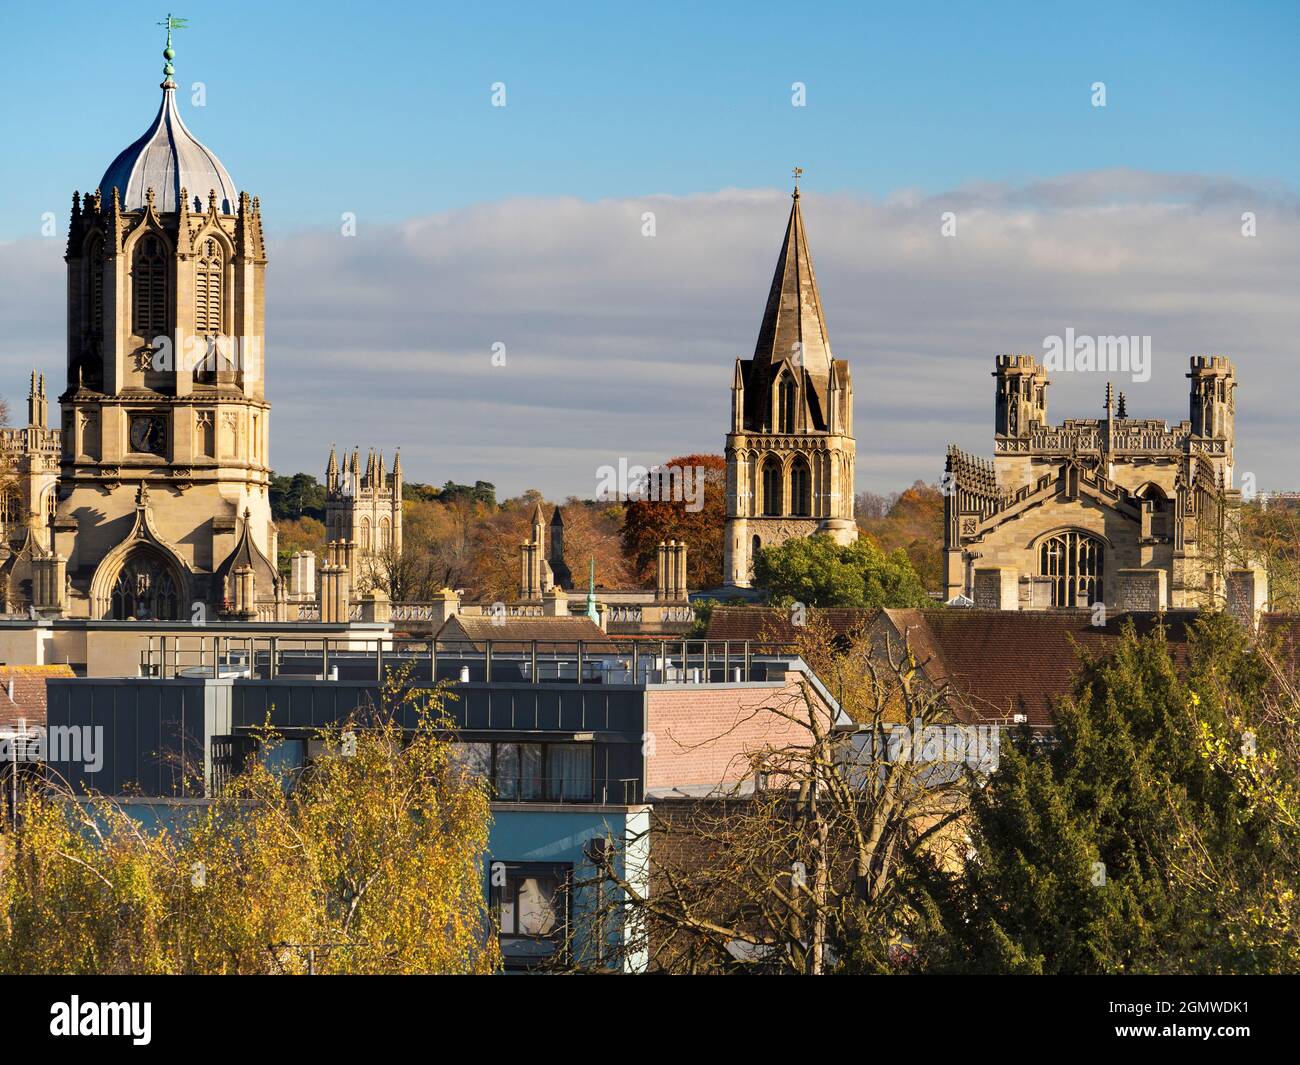 Oxford, England - 6 November 2017 Here we see the sort of skyline you can only see in Oxford. That's why it's called the city of dreaming spires... Fr Stock Photo